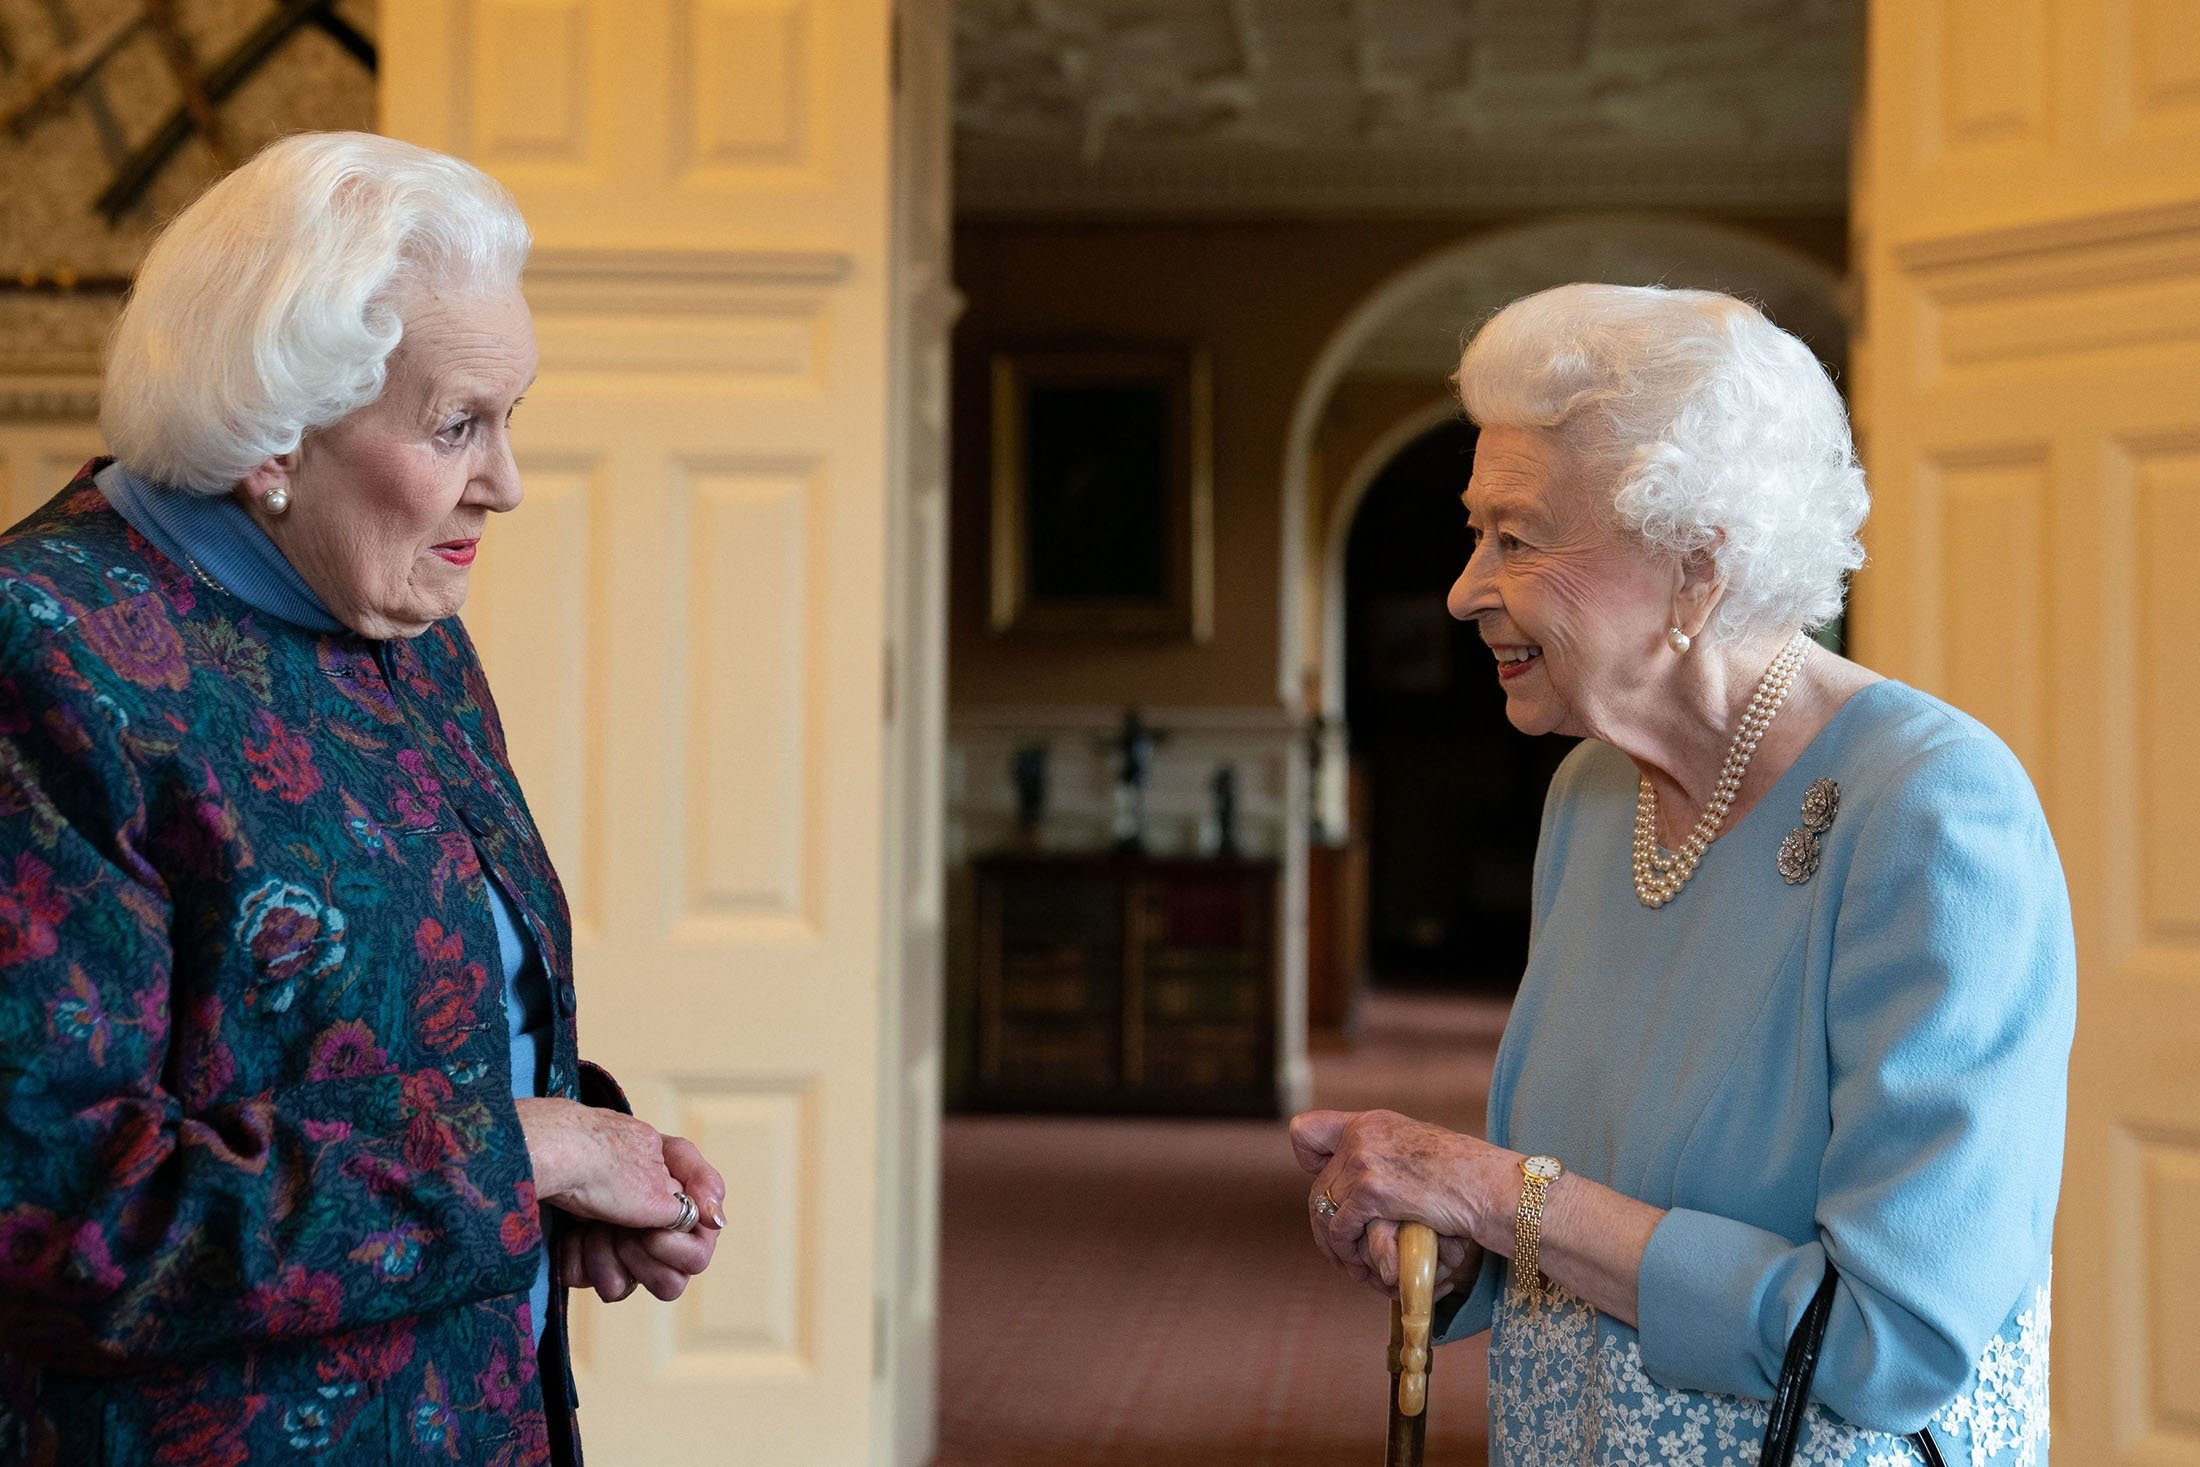 Britain's Queen Elizabeth II (R) meets Angela Wood (L), the woman who helped create coronation chicken, at a reception in the Ballroom of Sandringham House, the Queen's residence in Norfolk, U.K., Feb. 5, 2022. (AFP Photo)